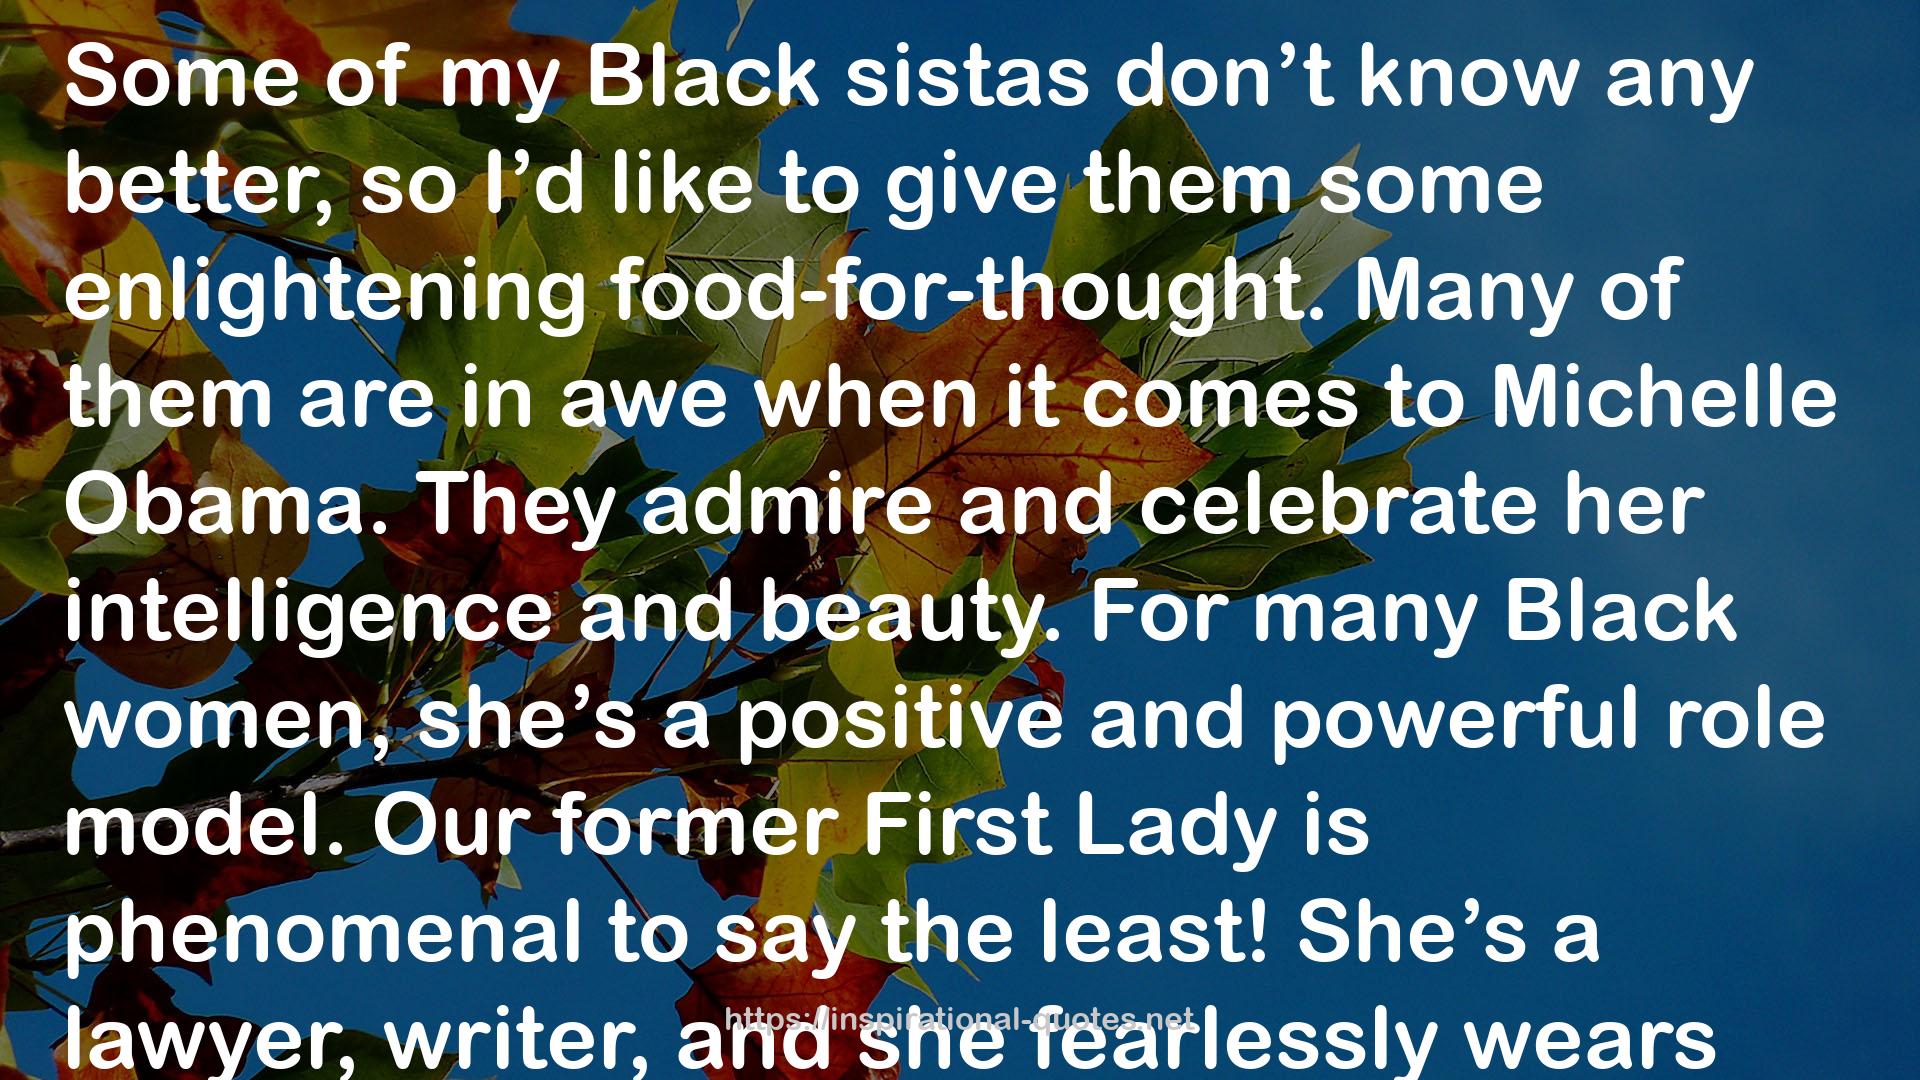 Stephanie Lahart quote : Some of my Black sistas don’t know any better, so I’d like to give them some enlightening food-for-thought. Many of them are in awe when it comes to Michelle Obama. They admire and celebrate her intelligence and beauty. For many Black women, she’s a positive and powerful role model. Our former First Lady is phenomenal to say the least! She’s a lawyer, writer, and she fearlessly wears many other hats with integrity and grace. But, here’s what I’d like to point out: If you can admire and celebrate her, why can’t you do the same for YOUR family and friends? Why is it that when people that you personally know obtain degrees, start a successful business, buy a home, are financially secure, happily married, etc… Here you go hatin’ on them. Why can’t you genuinely be happy for them and share in their greatness? I encourage you to celebrate the Black women around you, too!